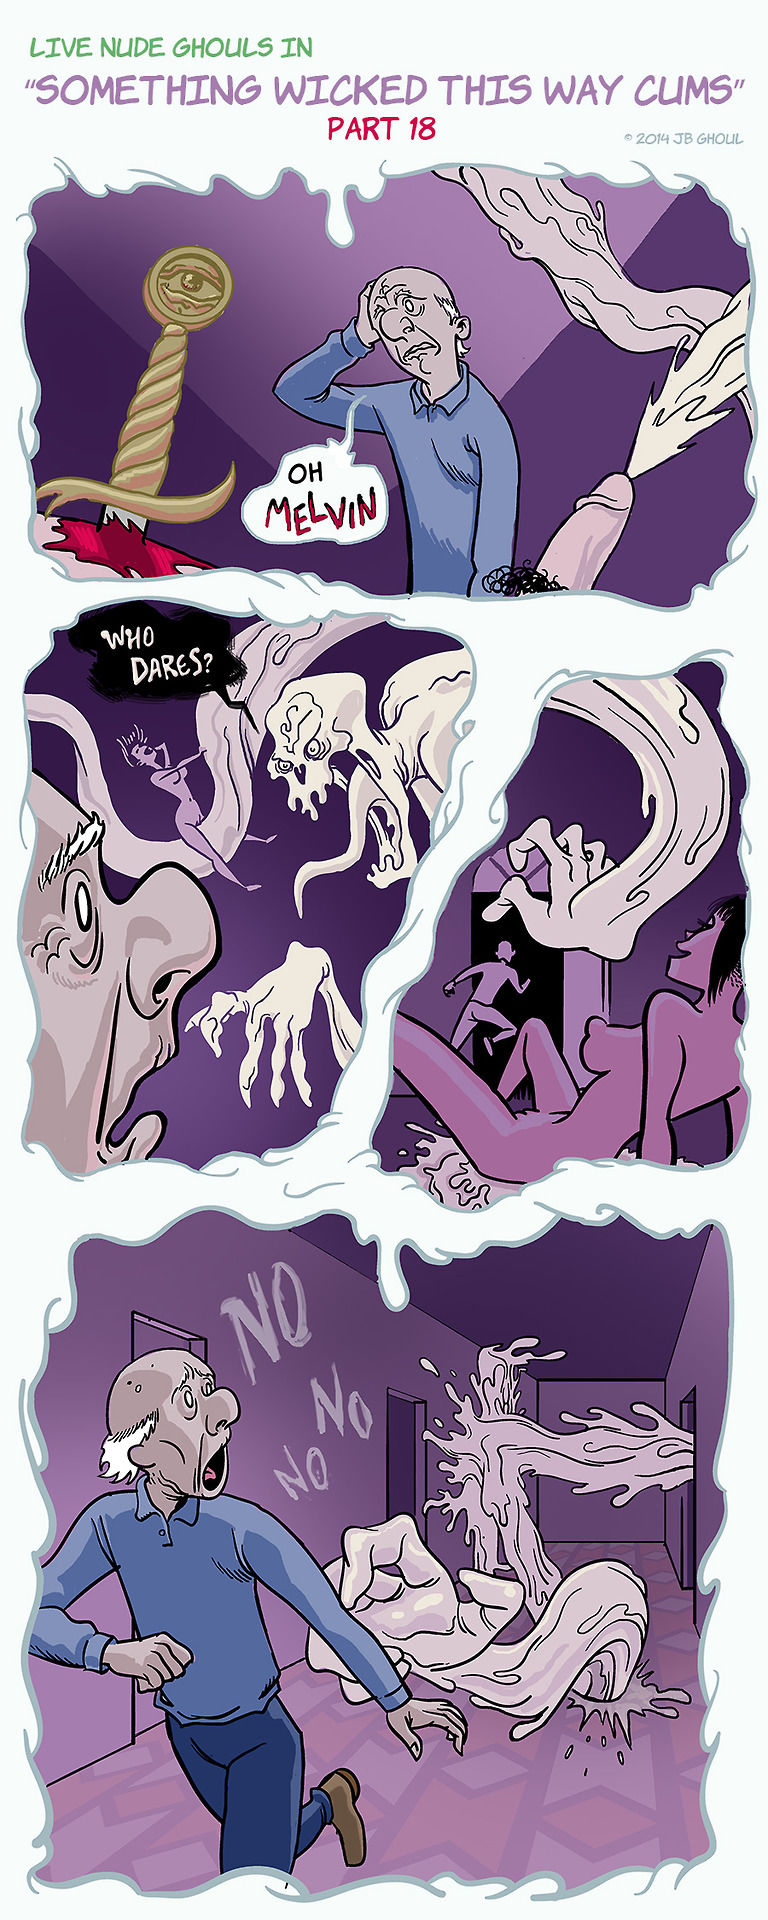 Live Nude Ghouls Something Wicked page 18